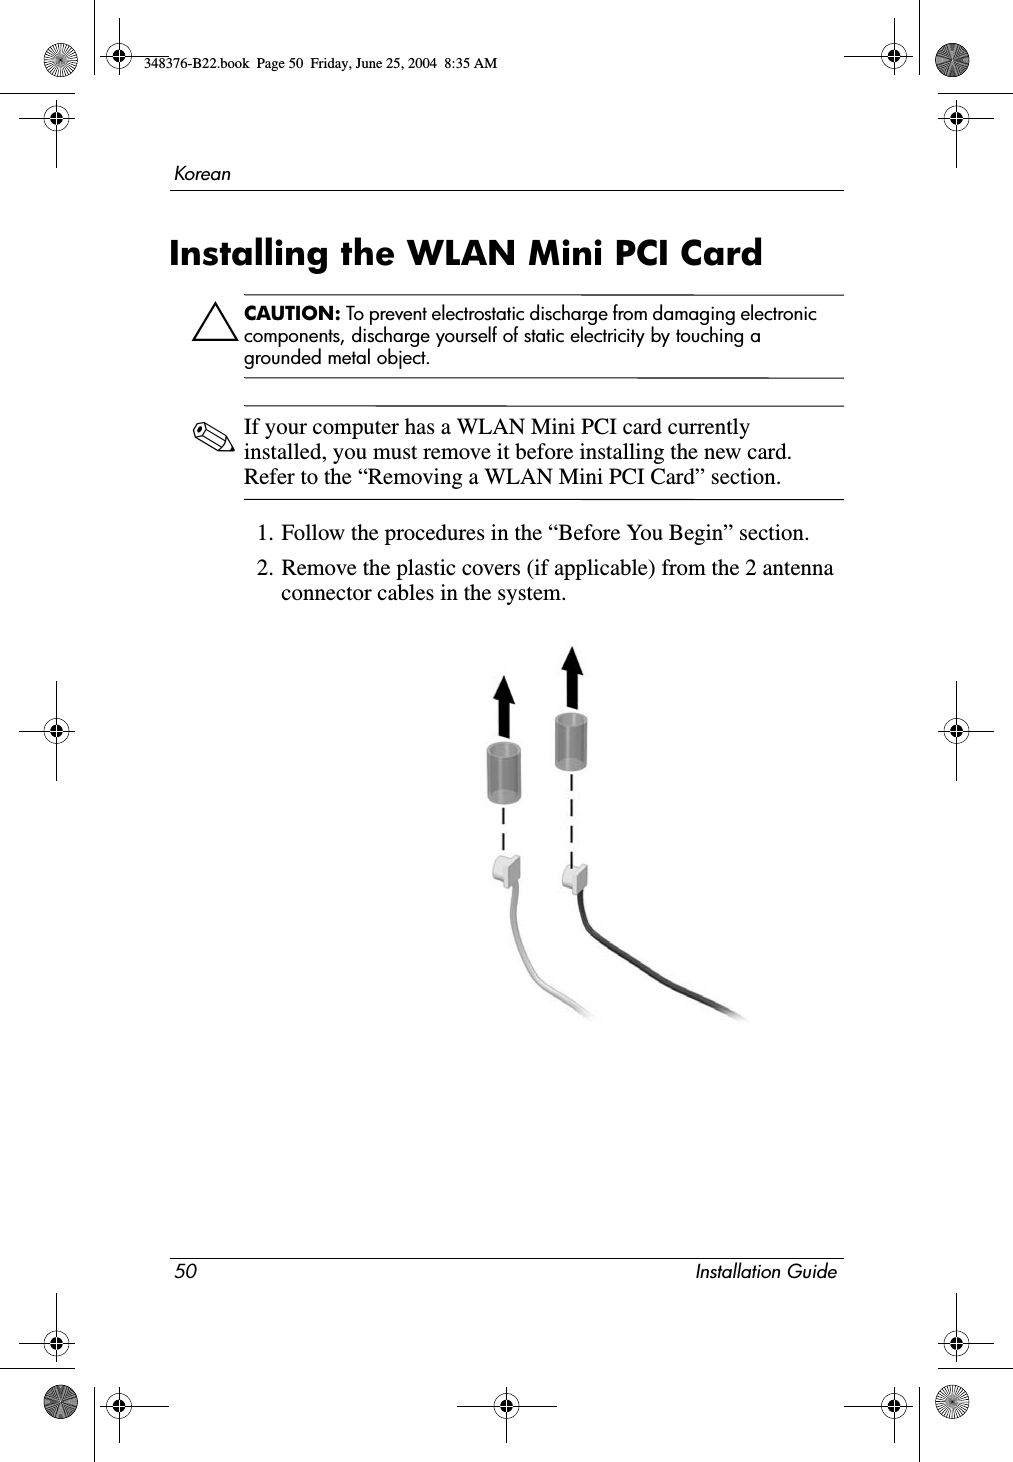 50 Installation GuideKoreanInstalling the WLAN Mini PCI CardÄCAUTION: To prevent electrostatic discharge from damaging electronic components, discharge yourself of static electricity by touching a grounded metal object.✎If your computer has a WLAN Mini PCI card currently installed, you must remove it before installing the new card. Refer to the “Removing a WLAN Mini PCI Card” section.1. Follow the procedures in the “Before You Begin” section.2. Remove the plastic covers (if applicable) from the 2 antenna connector cables in the system.348376-B22.book  Page 50  Friday, June 25, 2004  8:35 AM